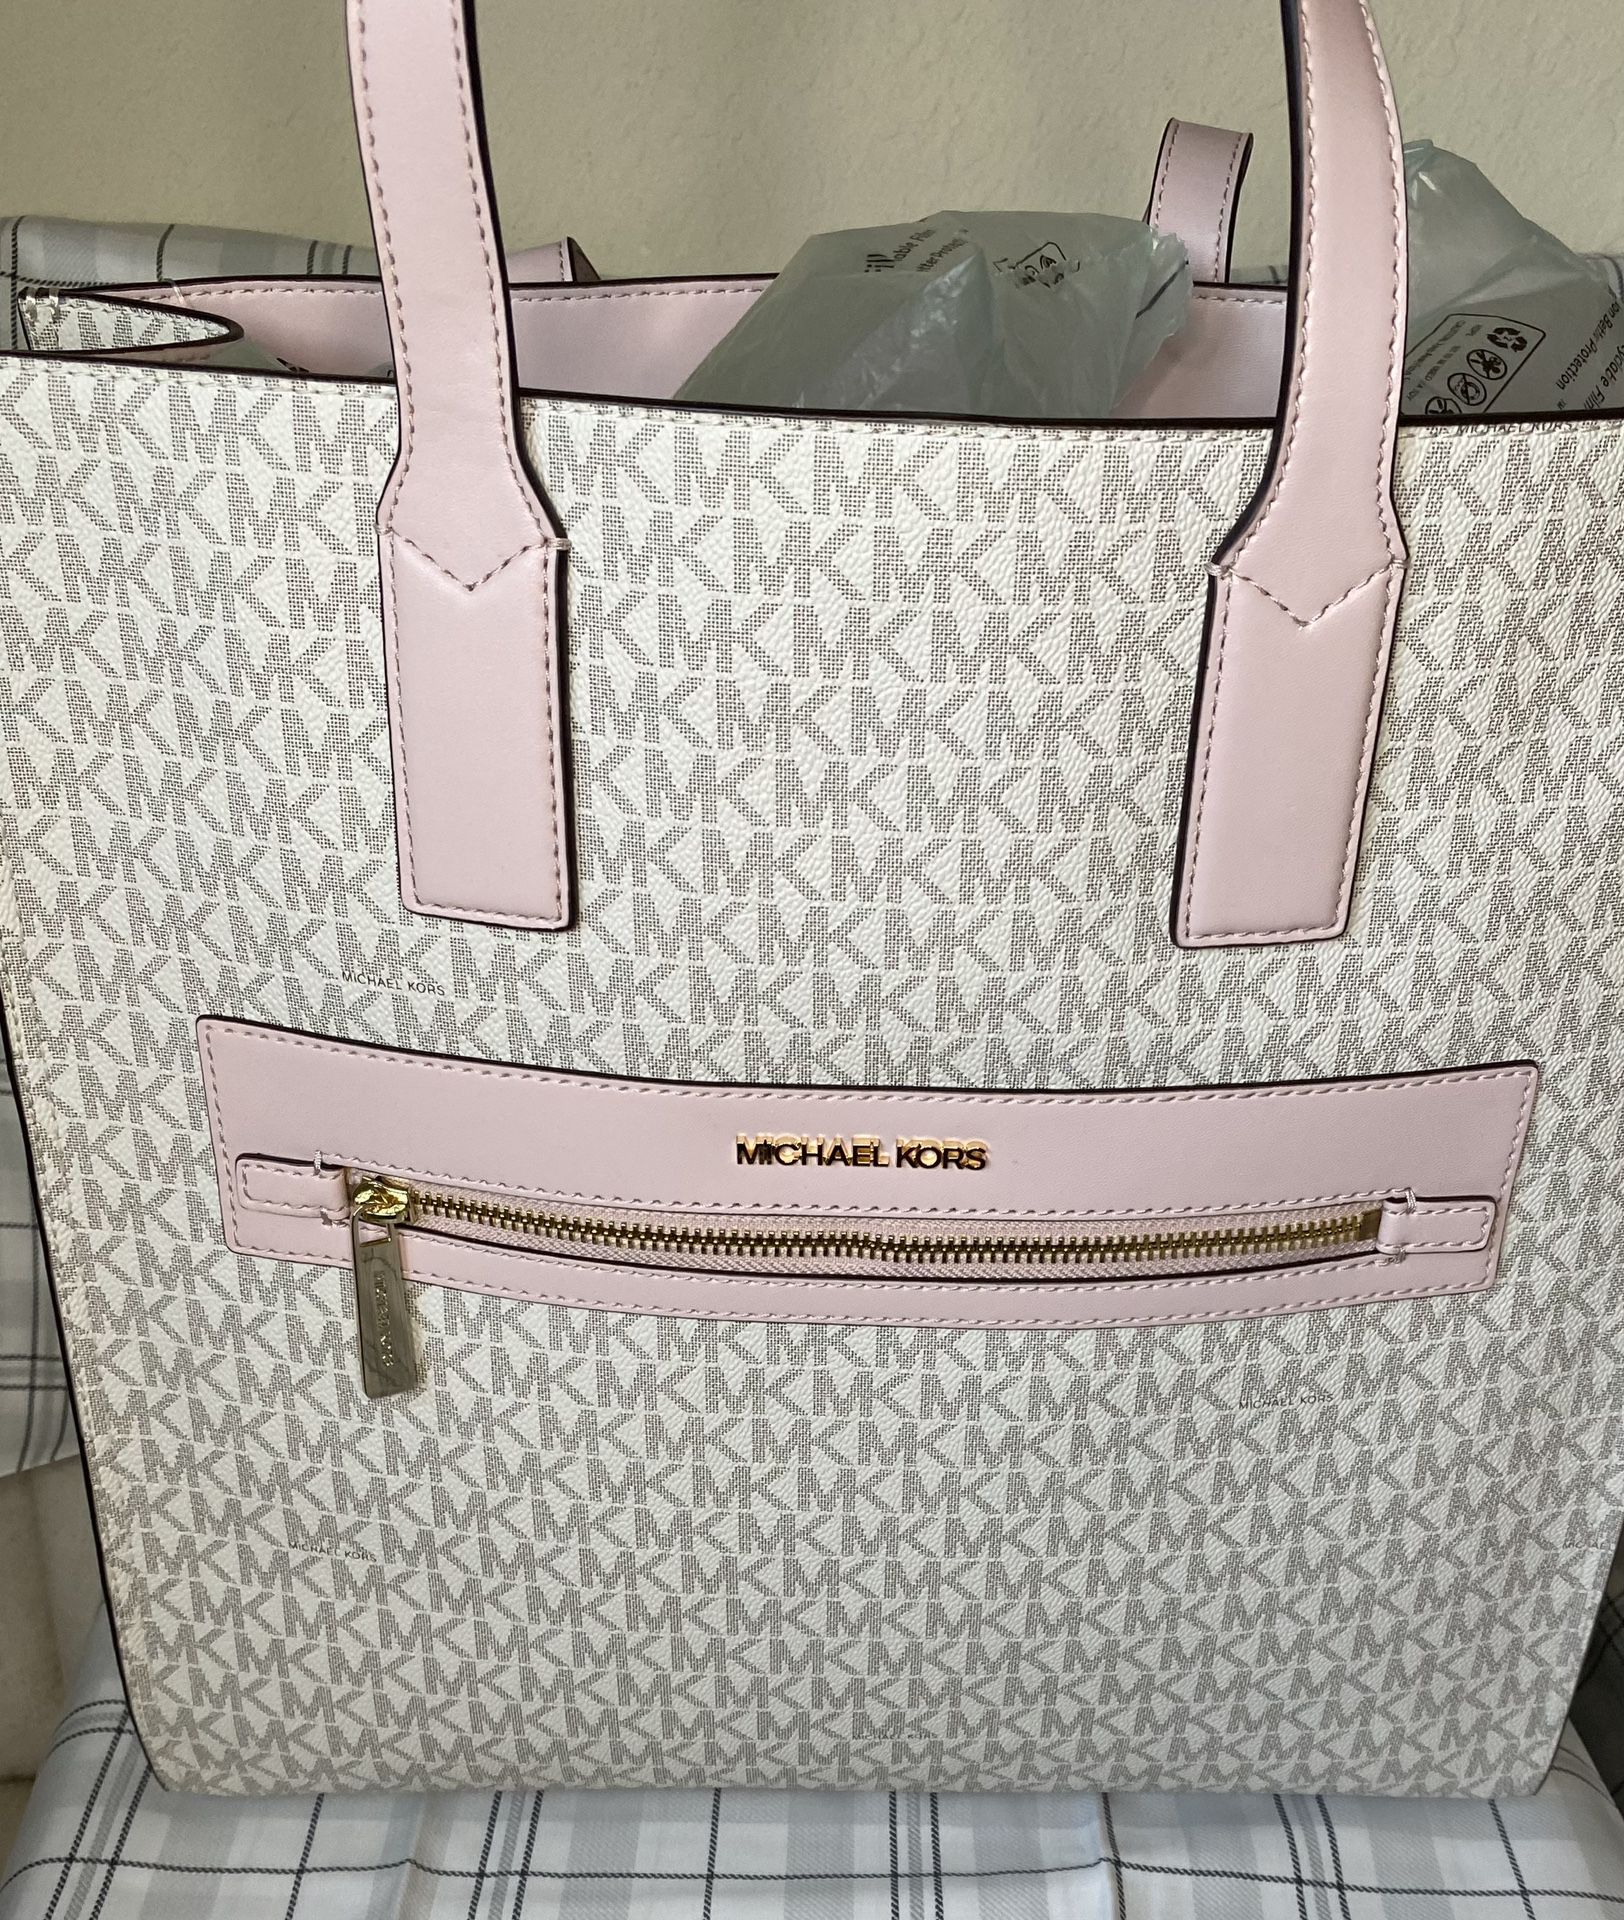 Michael Kors Charlotte Large Top Zip Tote for Sale in Laurel, MD - OfferUp